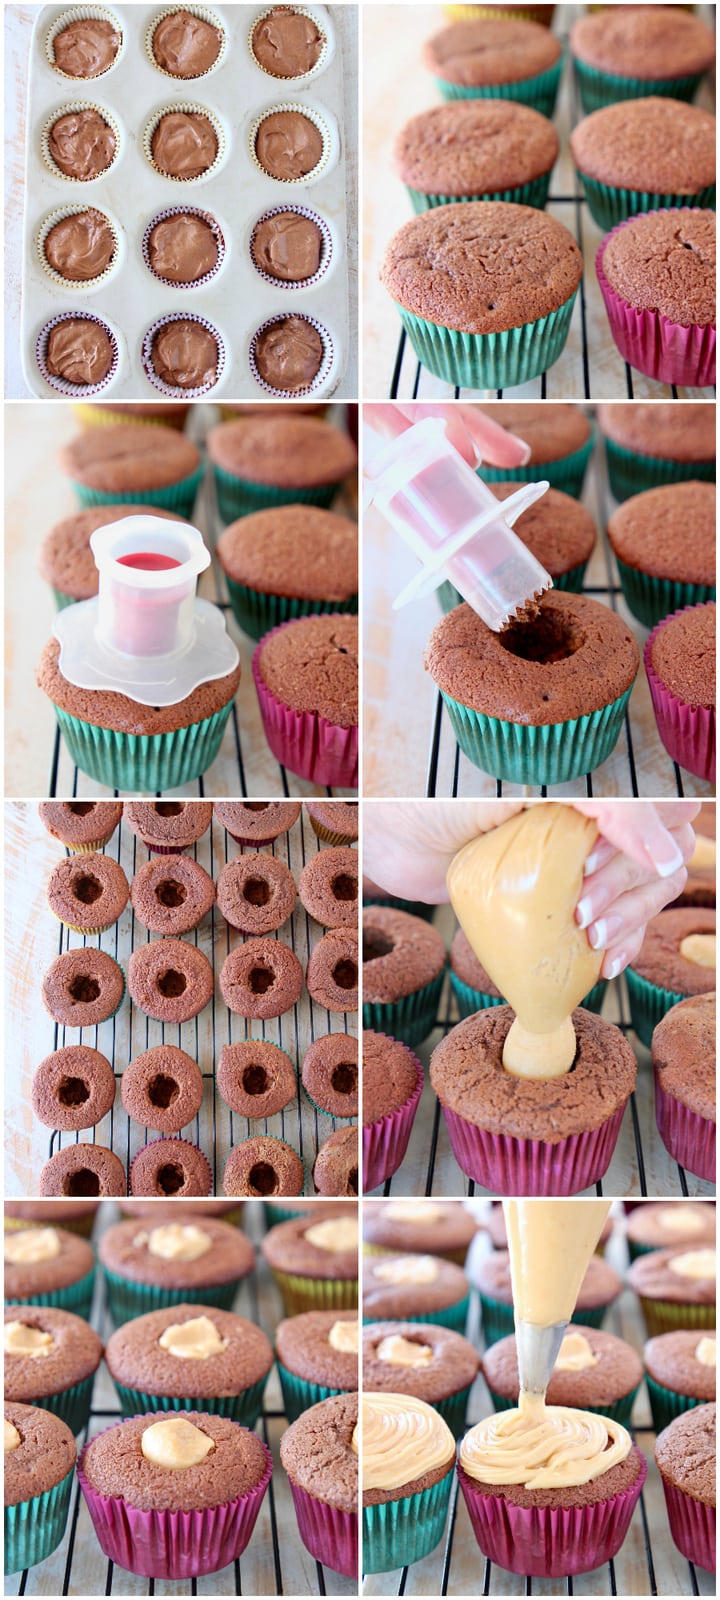 Peanut butter filled chocolate cupcake instructional images